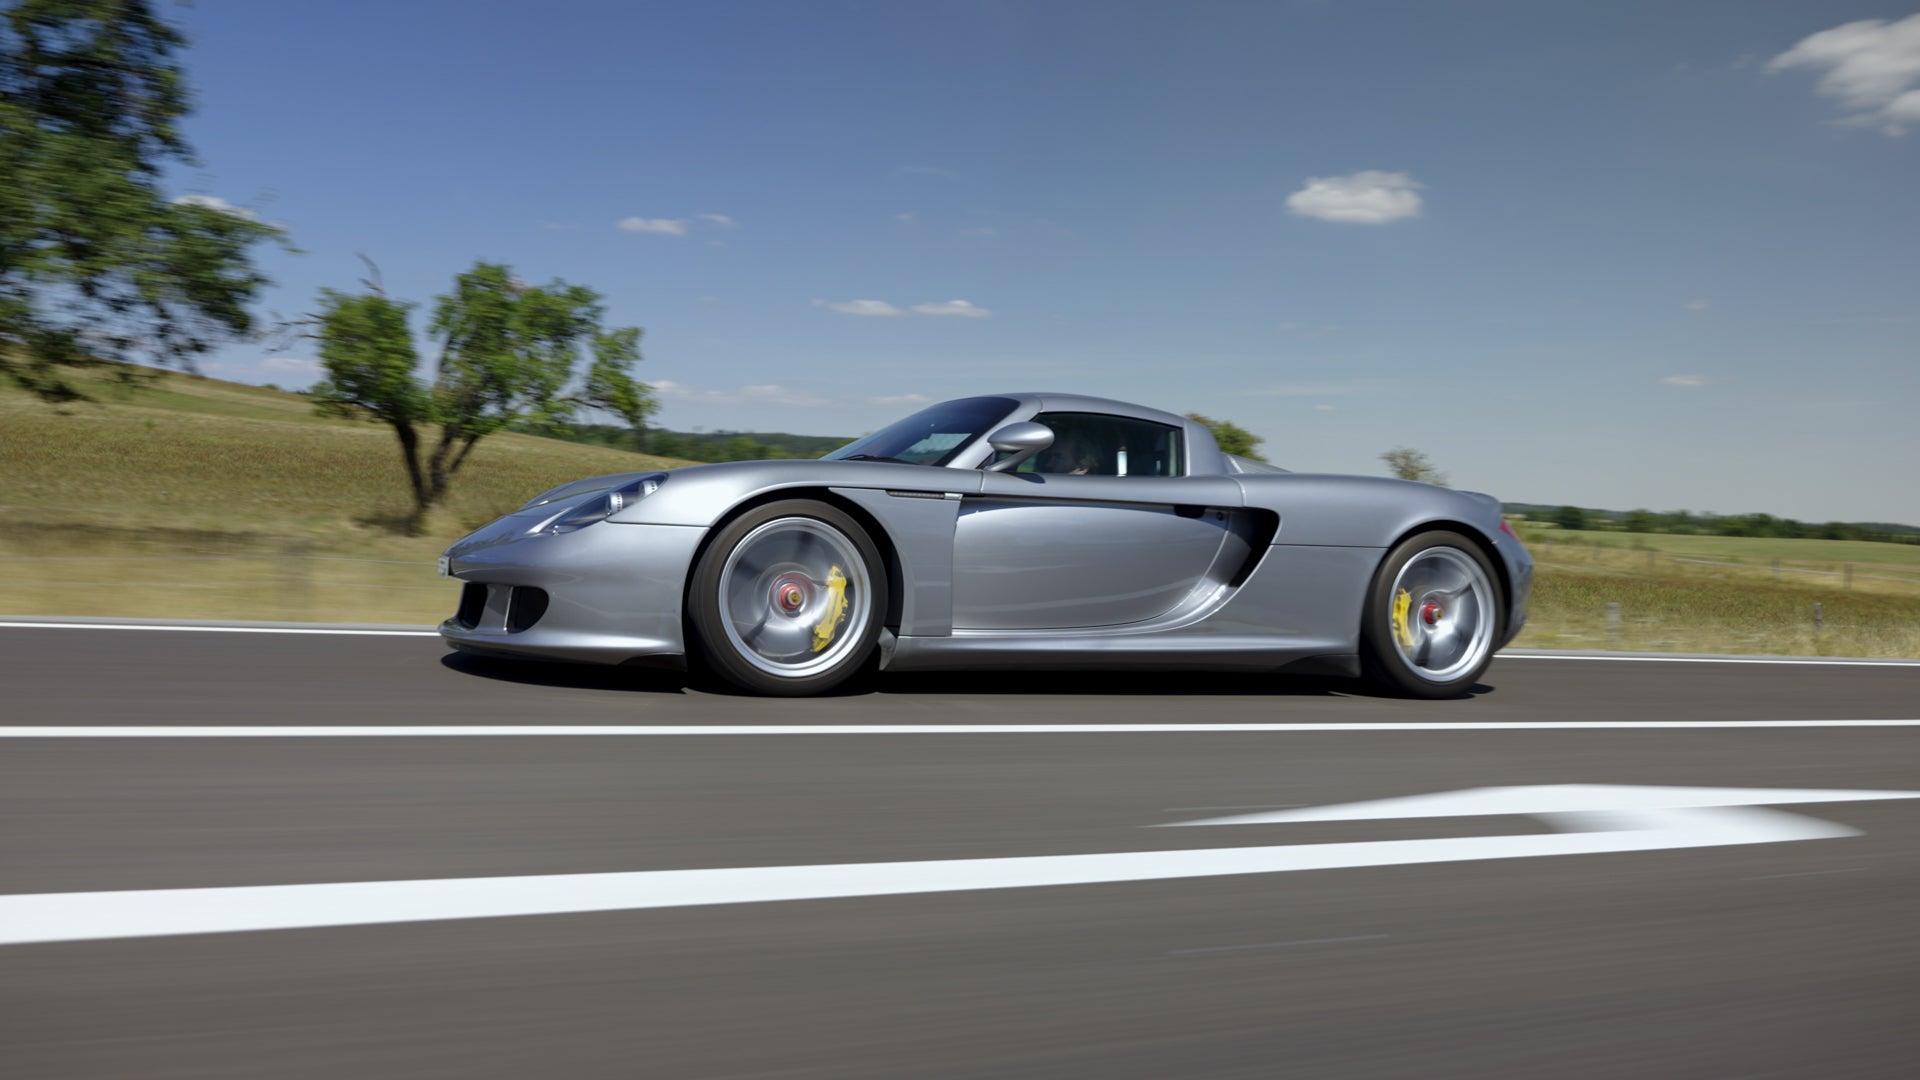 Your 2004 Porsche Carrera GT Is Recalled, but I'm Here To Help